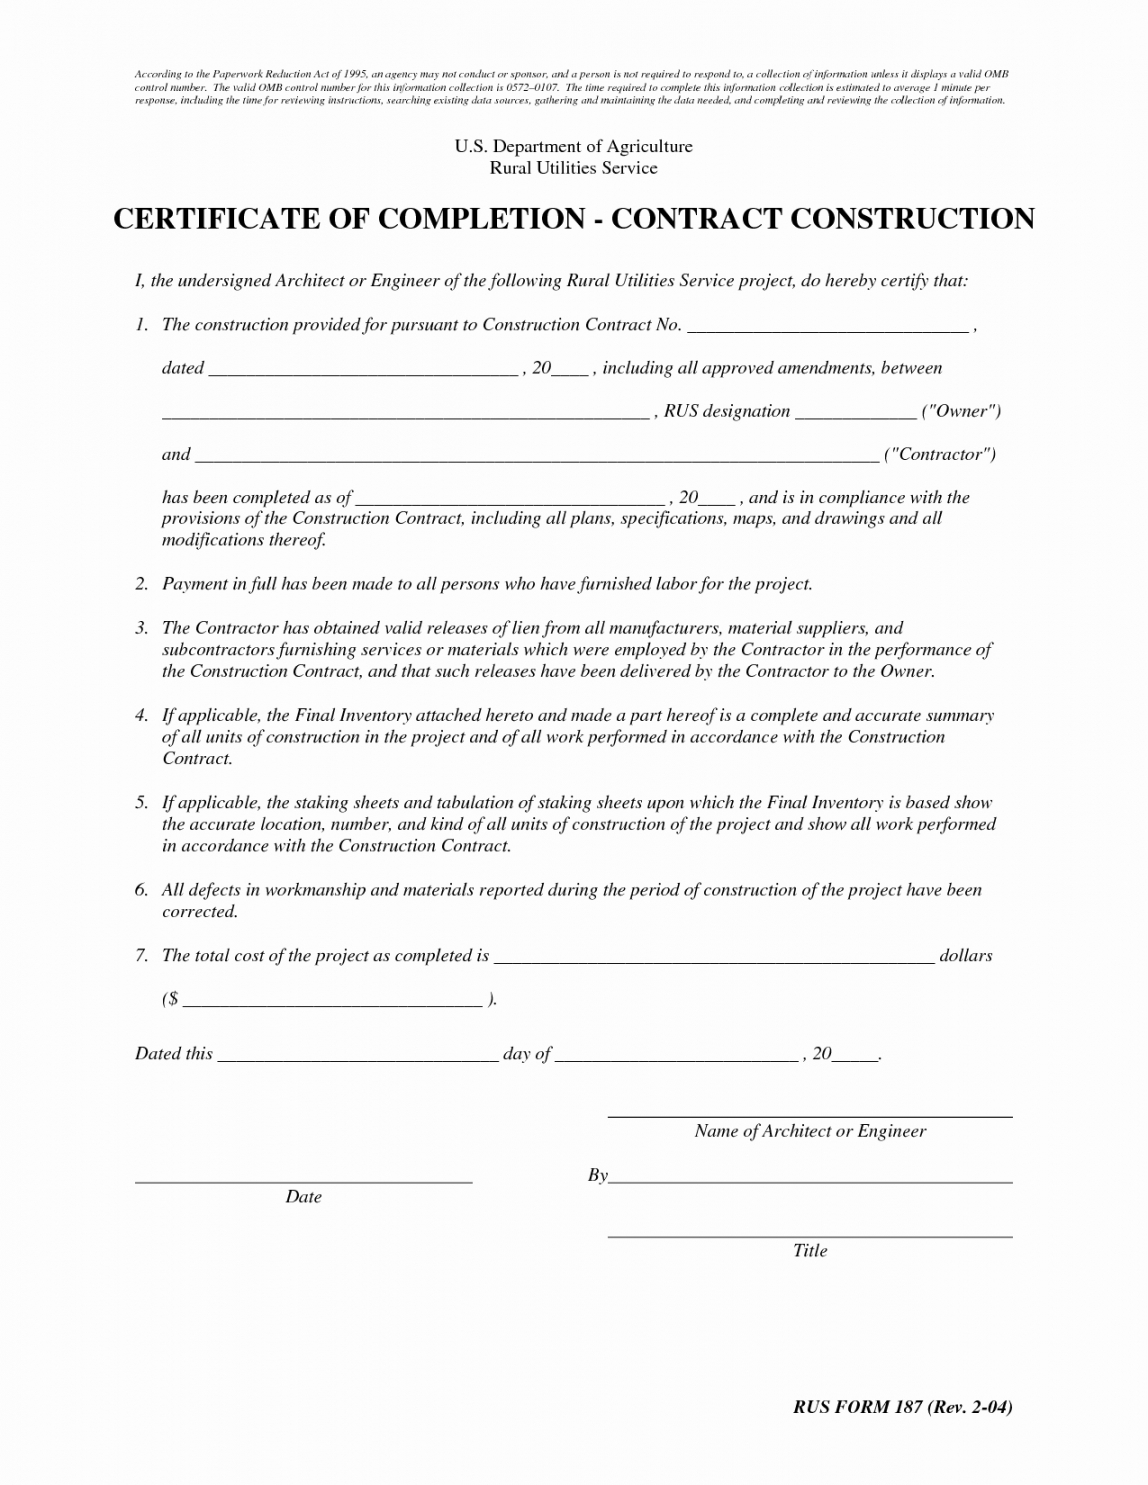 Free Certificate Of Completion Template Construction Design For Certificate Of Completion Construction Templates